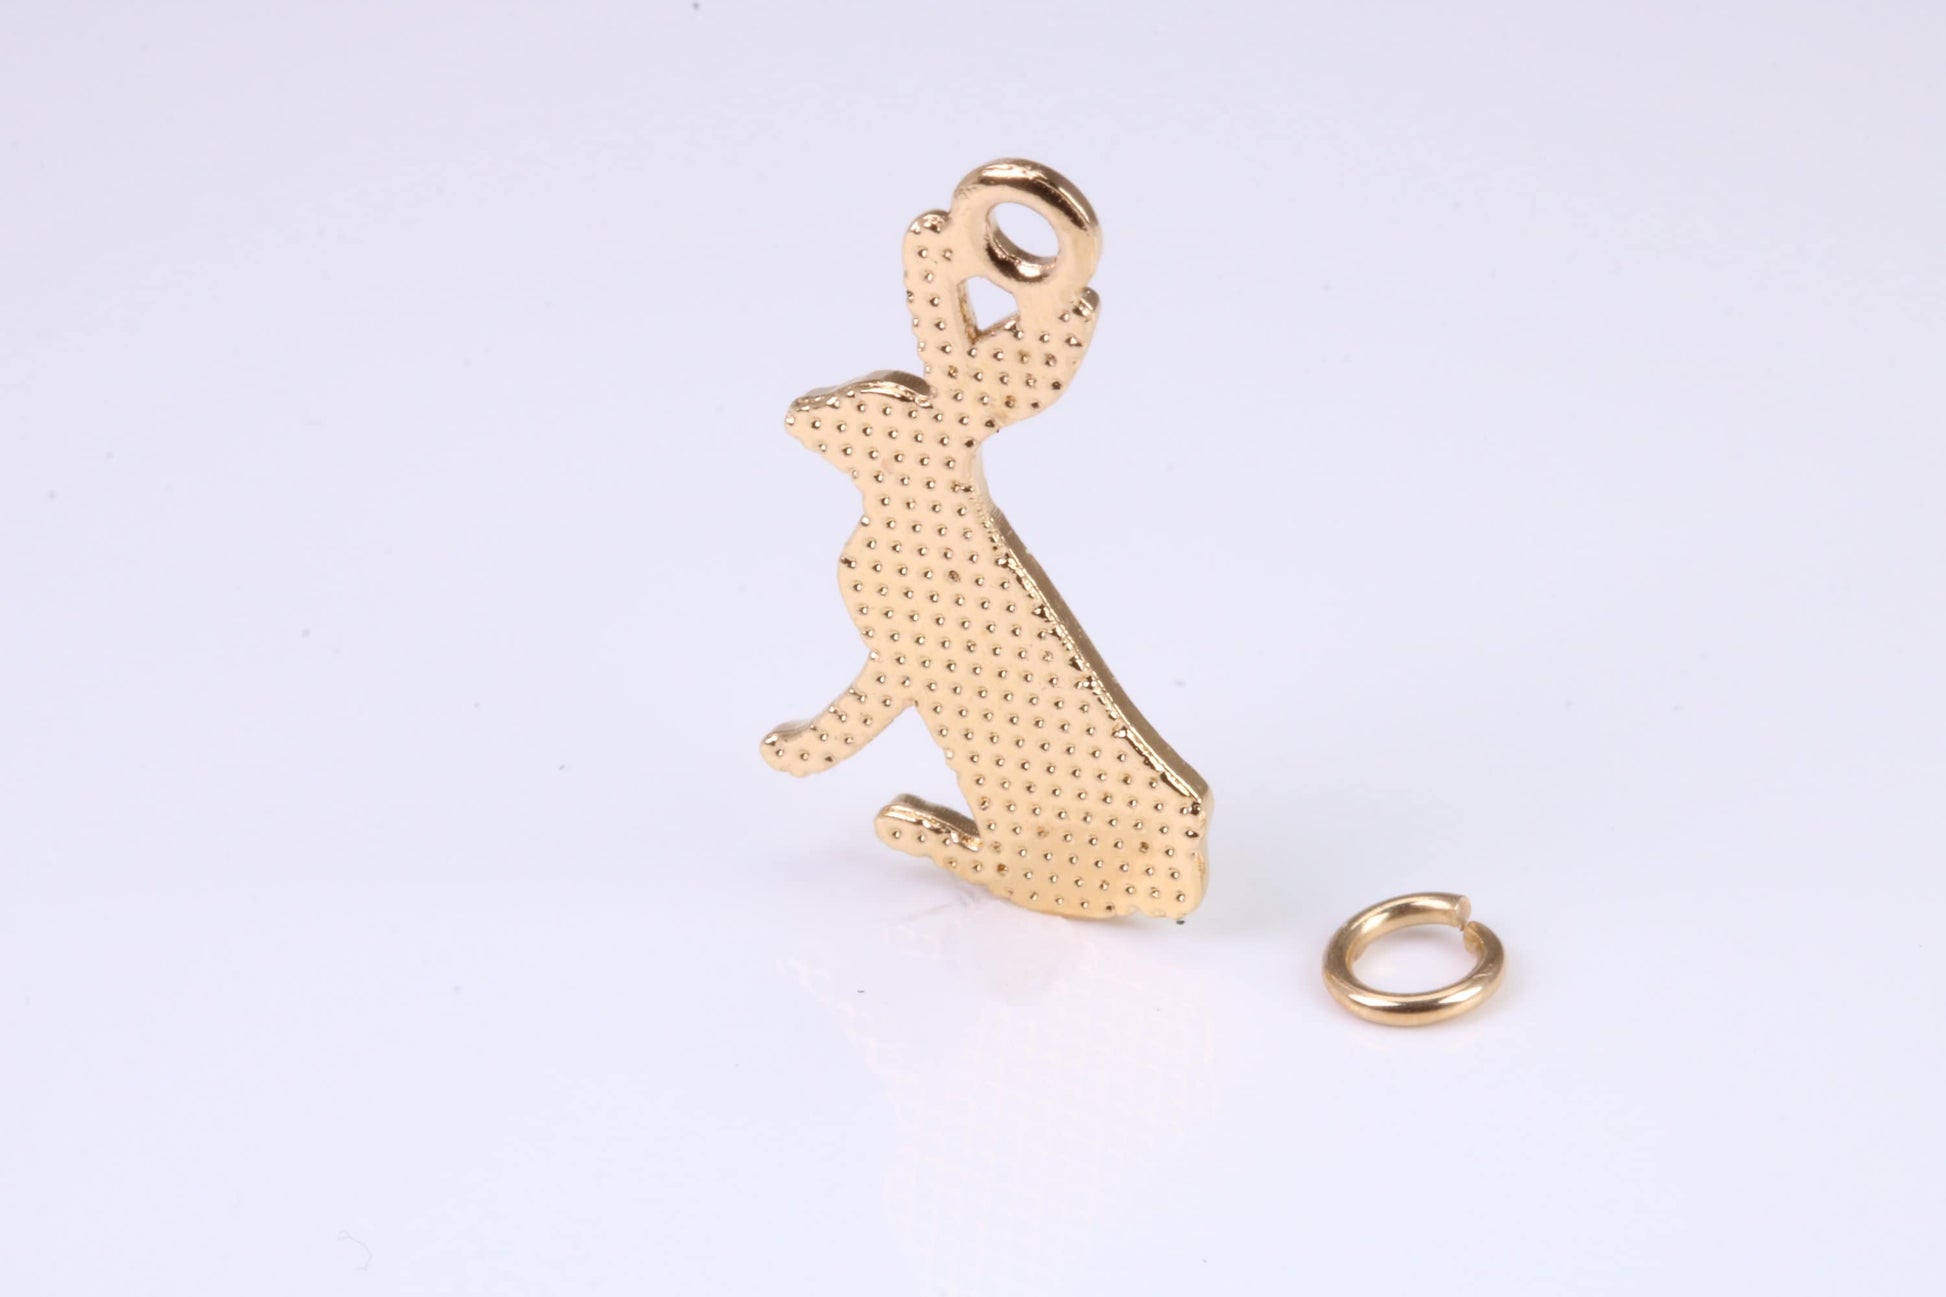 Hare Charm, Traditional Charm, Made from Solid Yellow Gold, British Hallmarked, Complete with Attachment Link